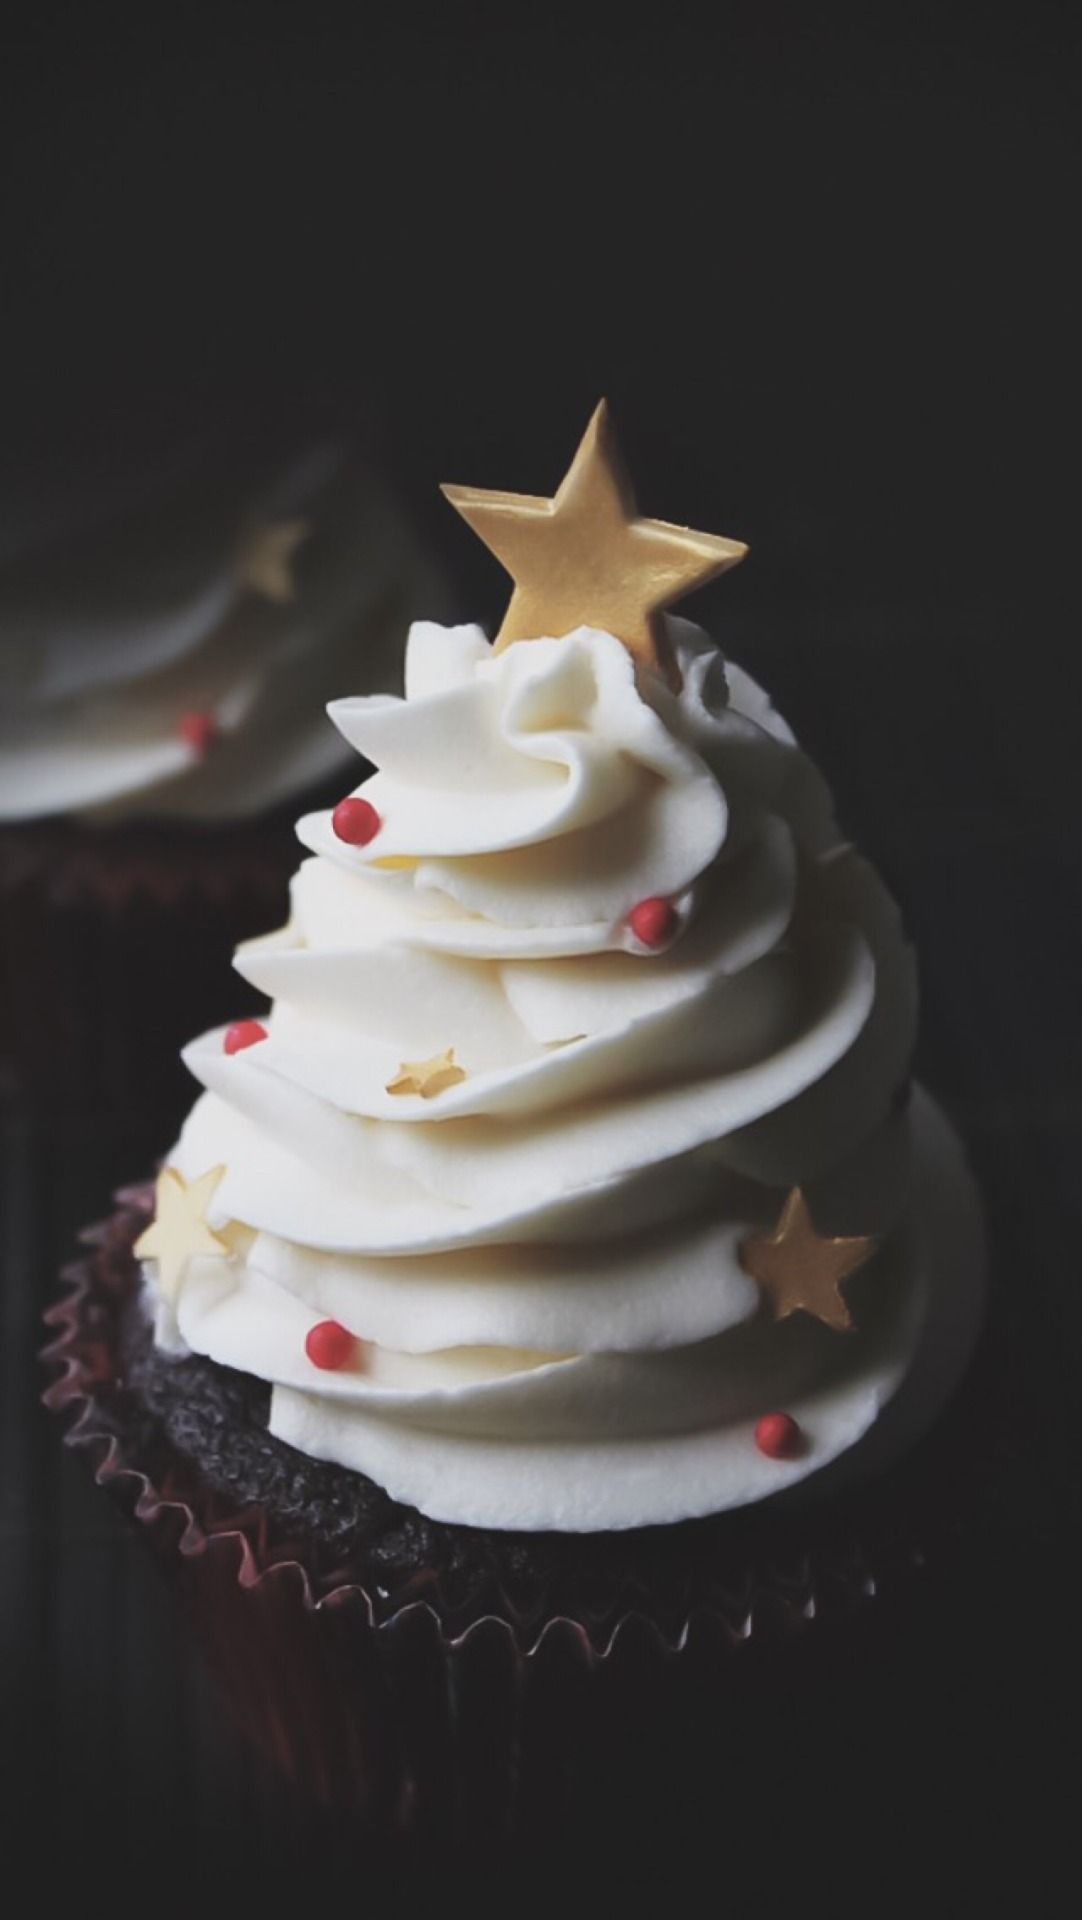 Christmas snow winter lights tumblr food background cupcake christmastree iPhone background christmas background lockscreens winter lockscreens winter wallpaper winter background christmas lockscreen christmas wallpaper enchantedbgs